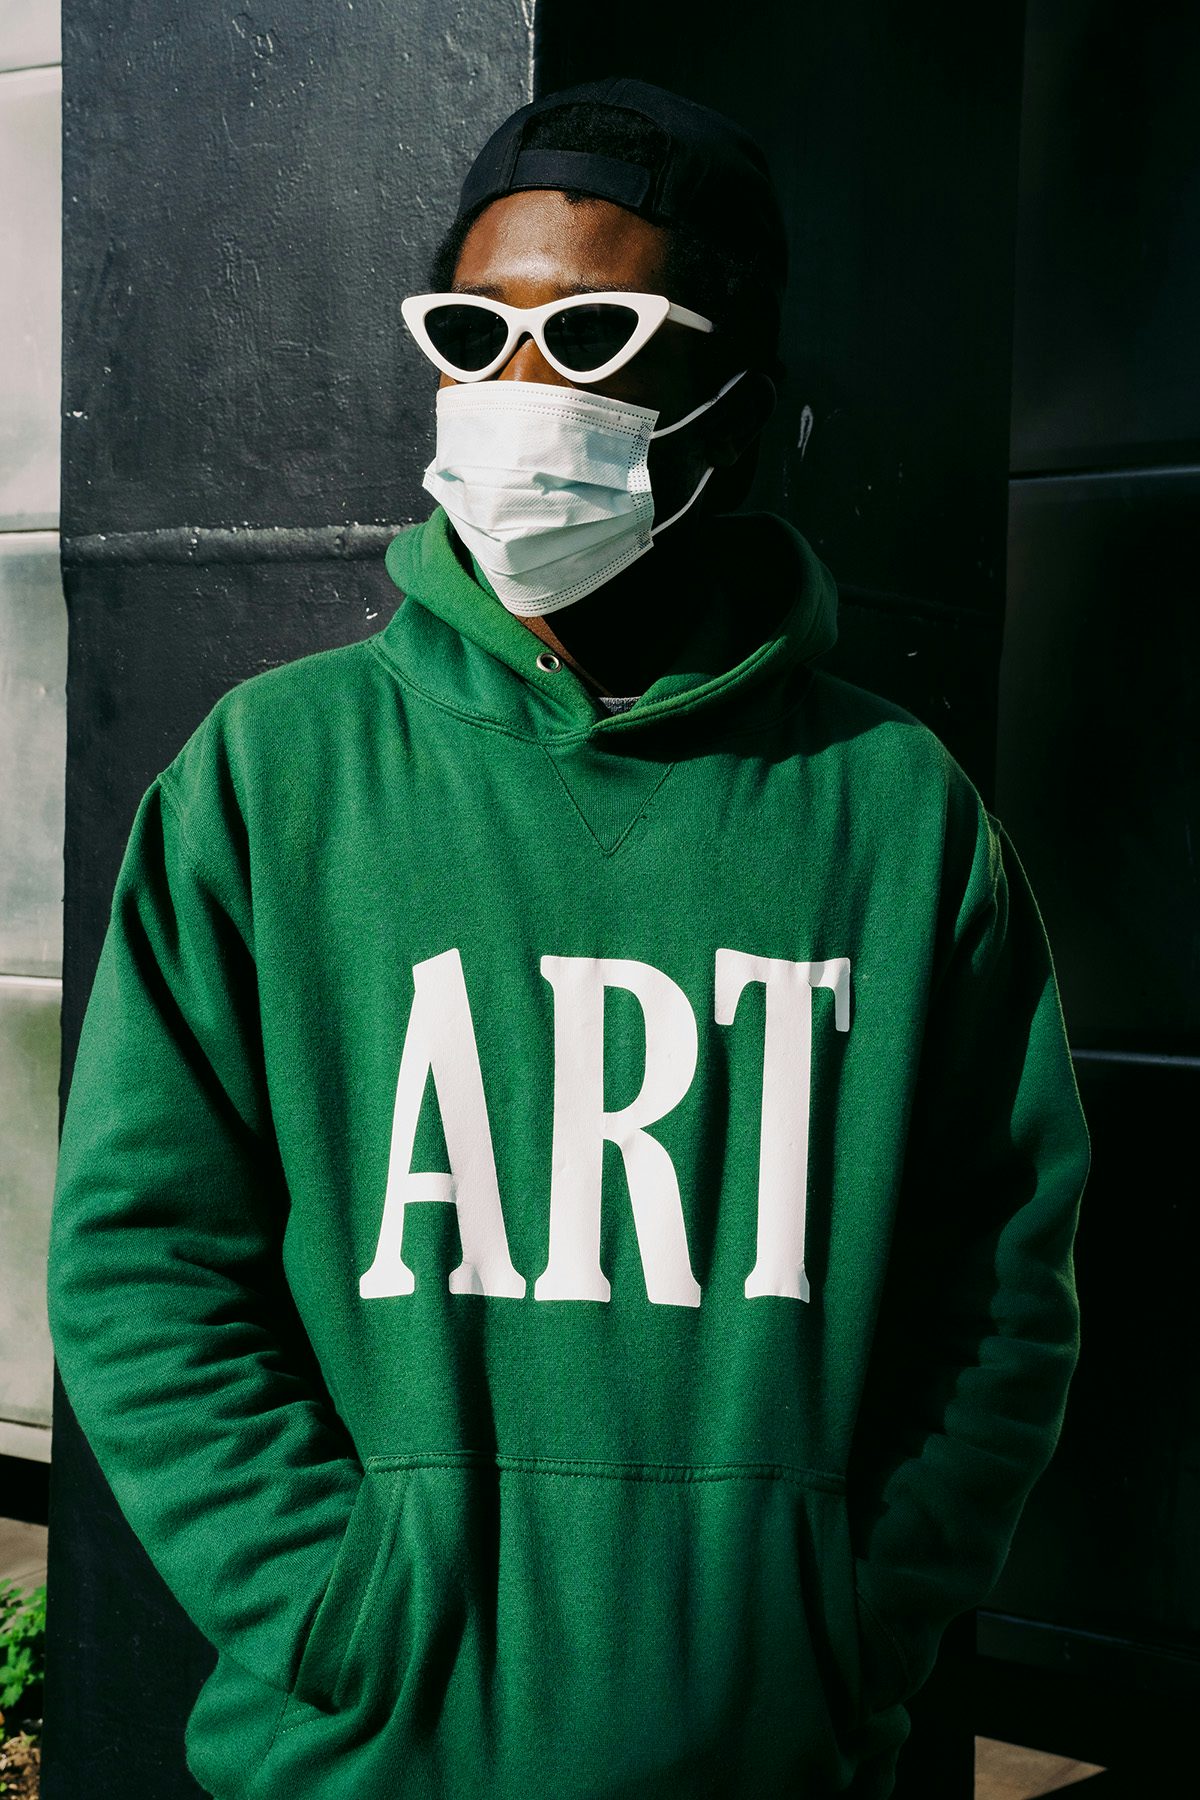 Portrait photograph of a person wearing sunglasses, a mask, and a green hoodie feauturing the word 'Art' by Jeremiah Babatunde